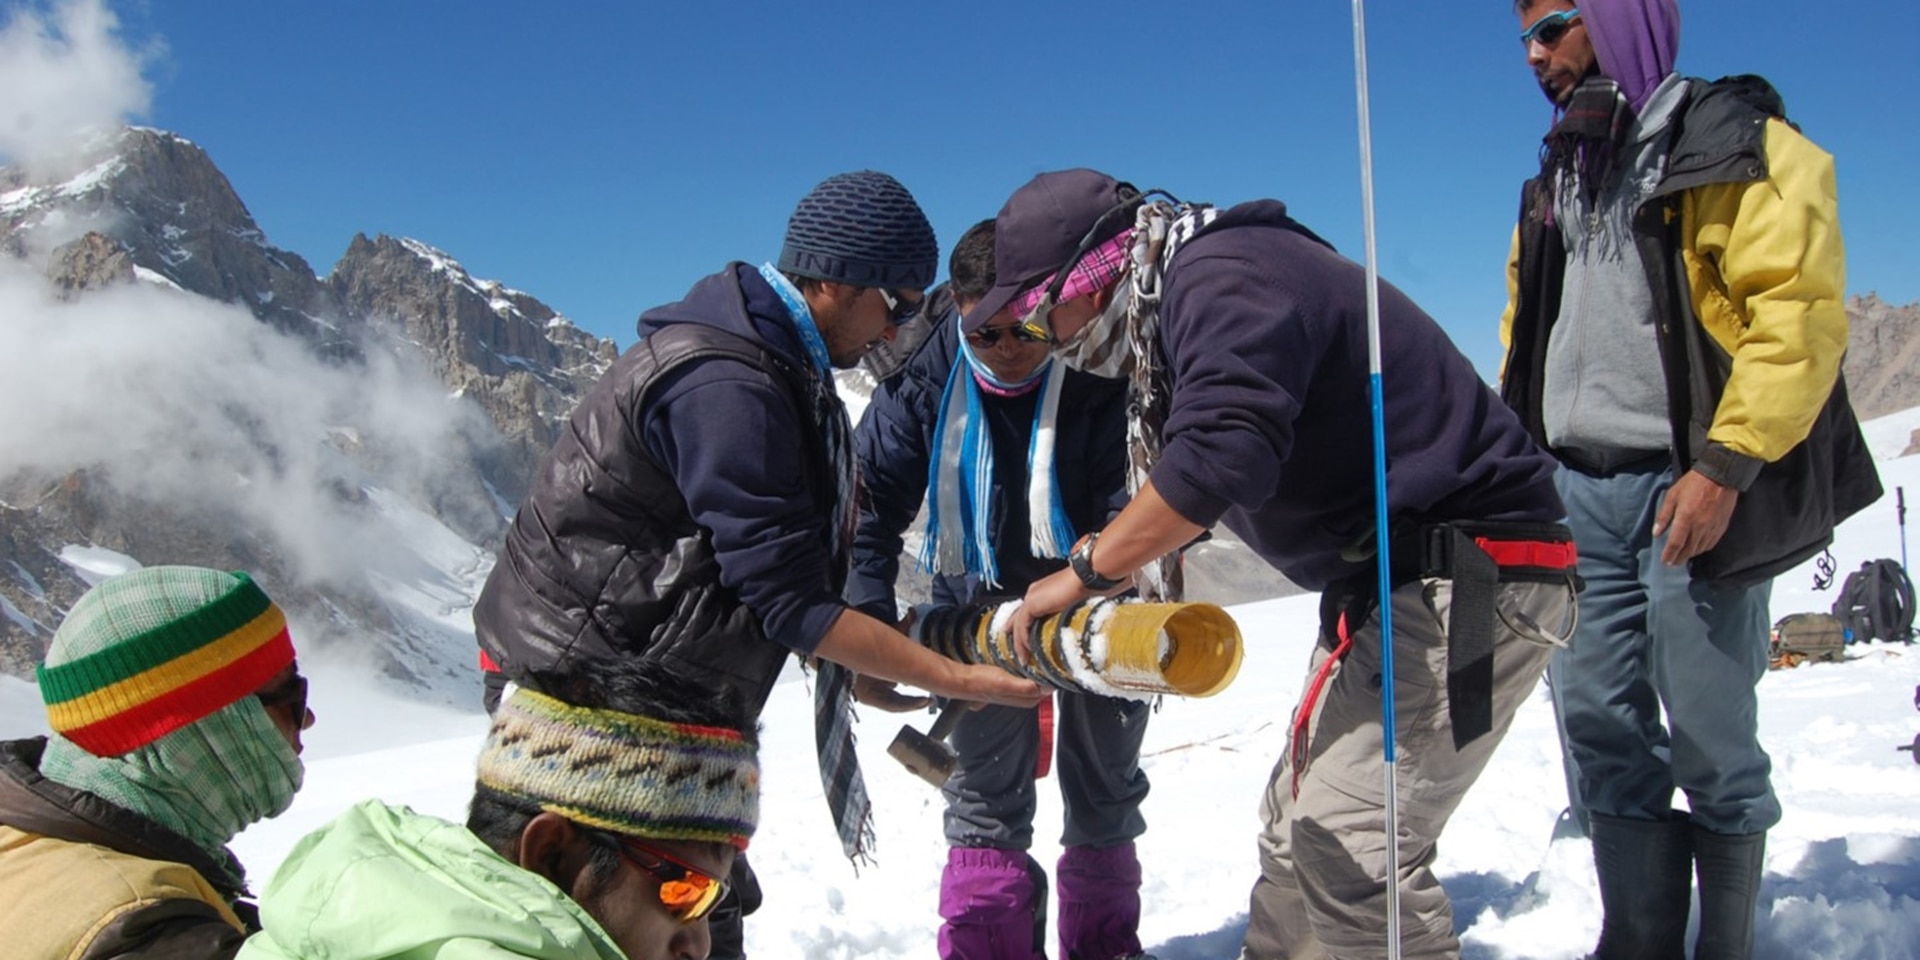  On a snowy mountain, a group of young people are positioning material to monitor glaciers. 